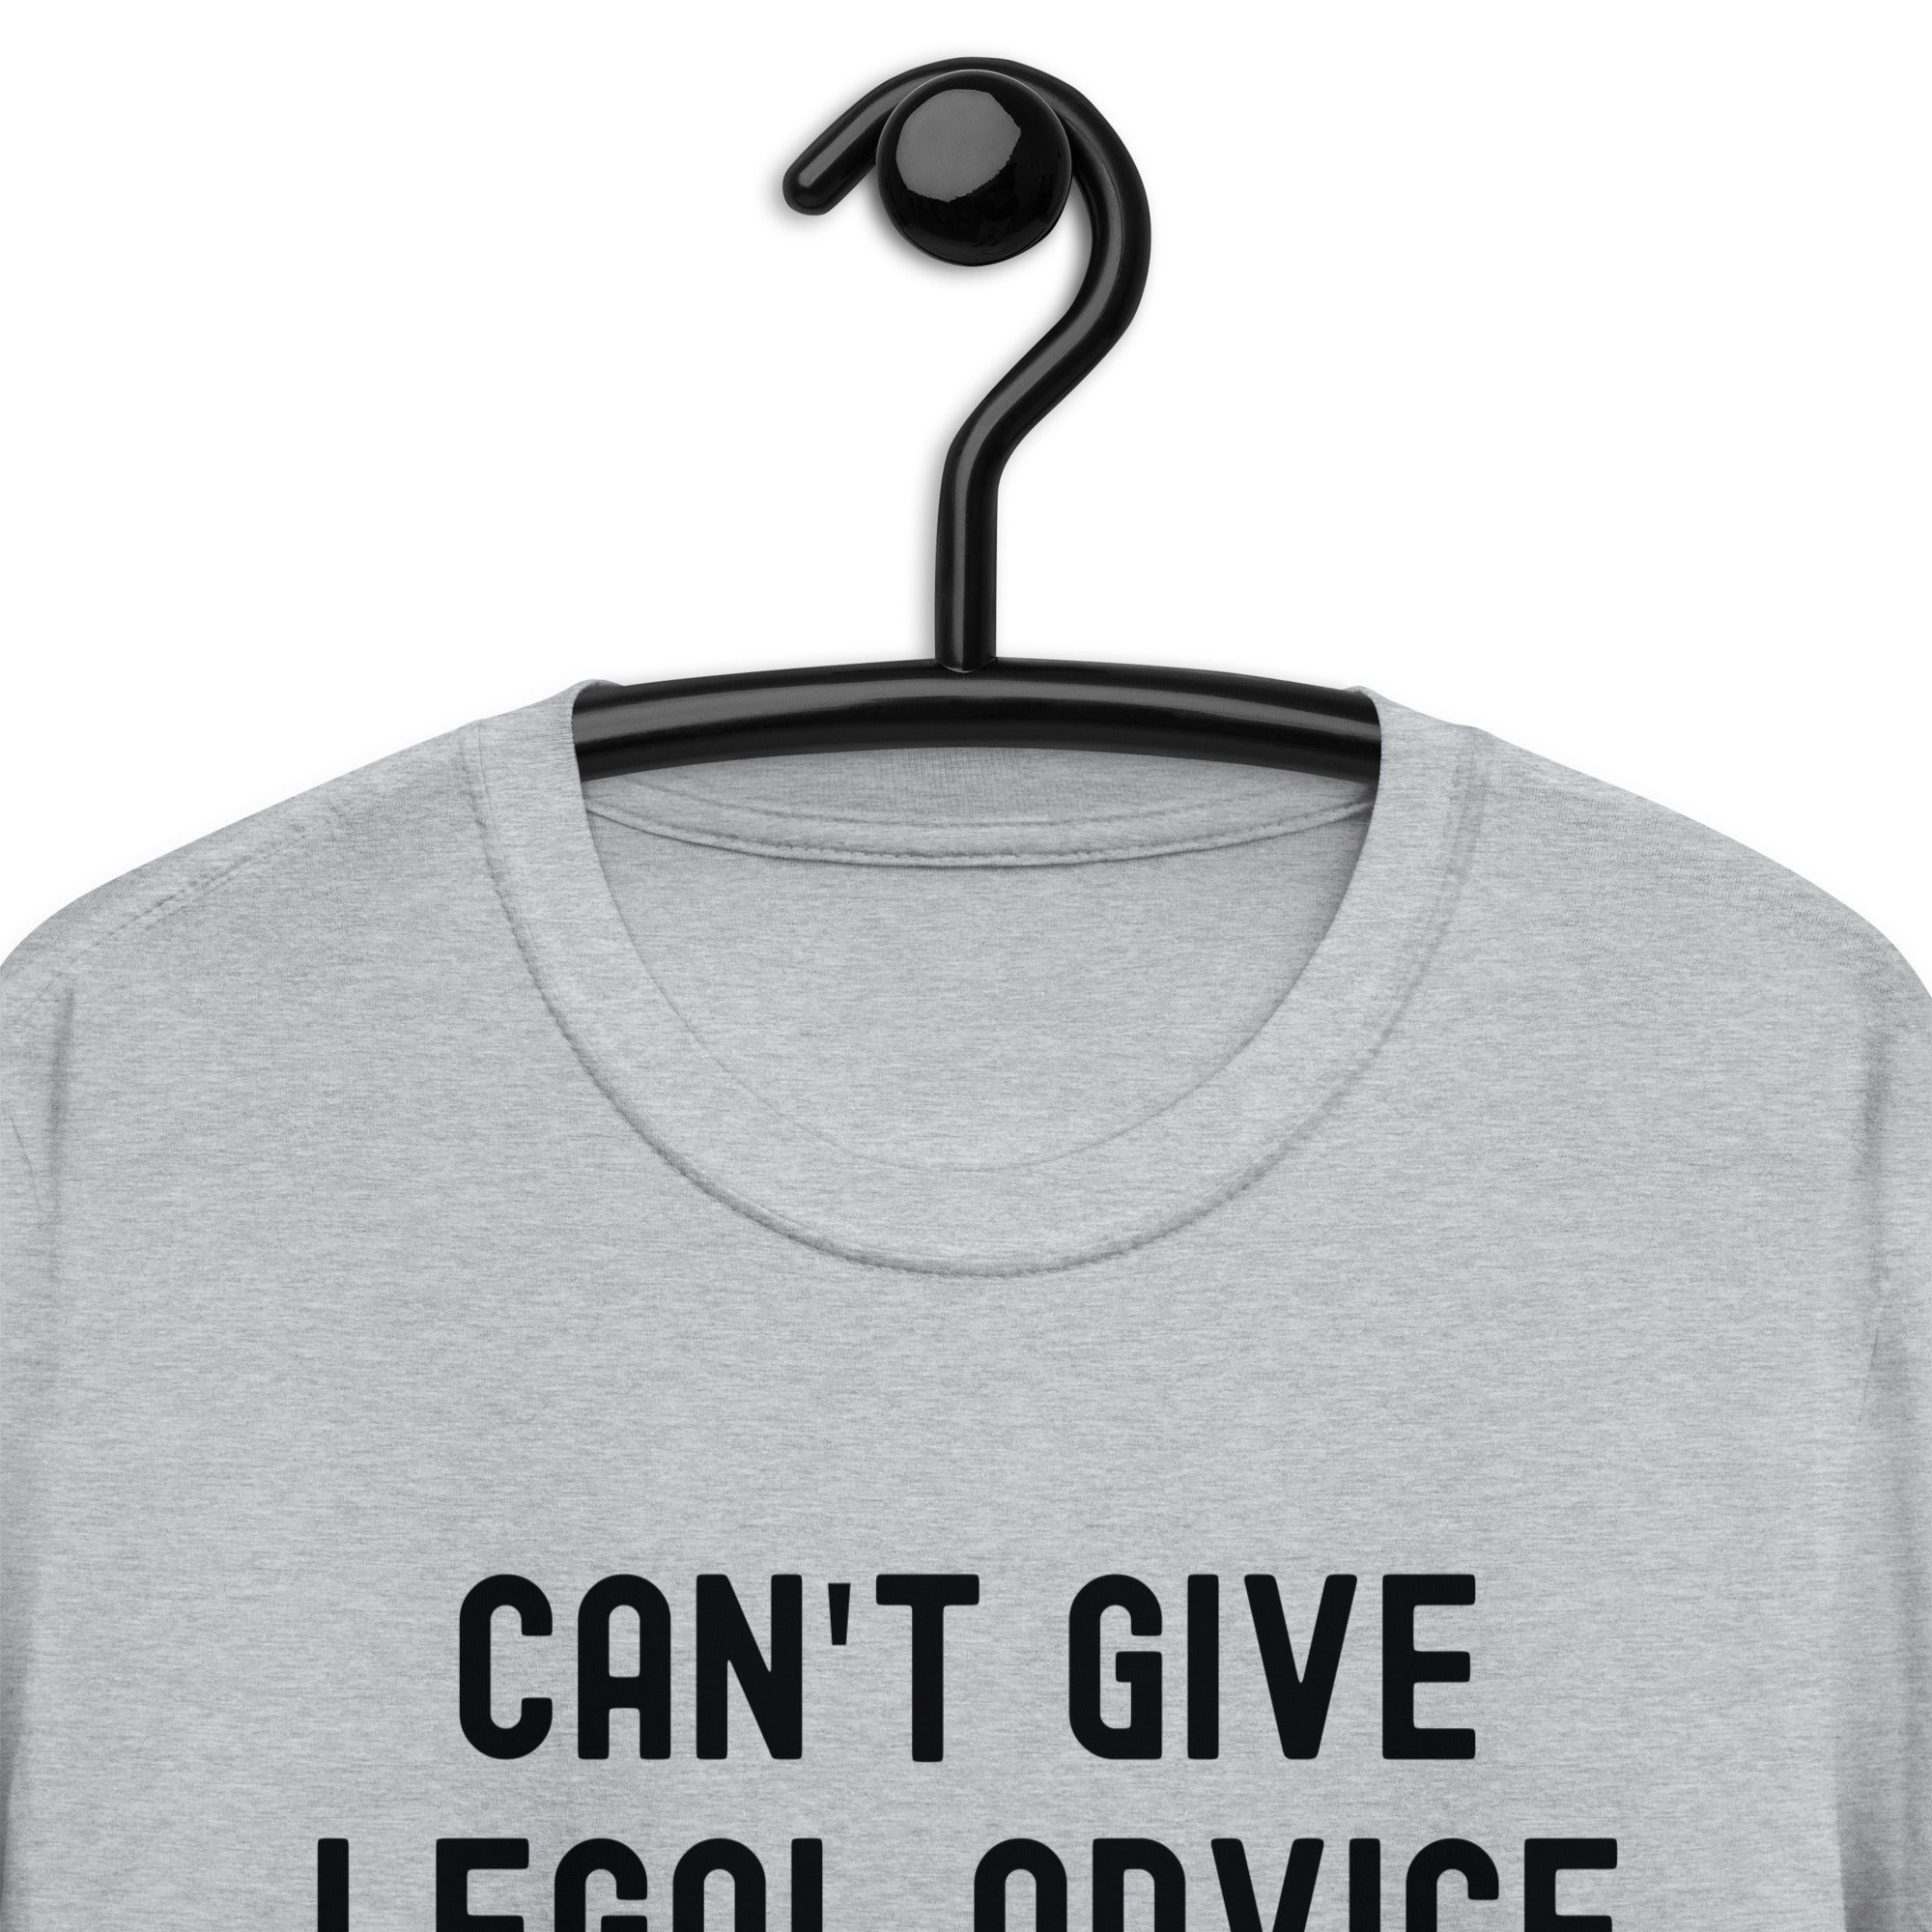 Short-Sleeve Unisex T-Shirt | Can’t give legal advice without coffee